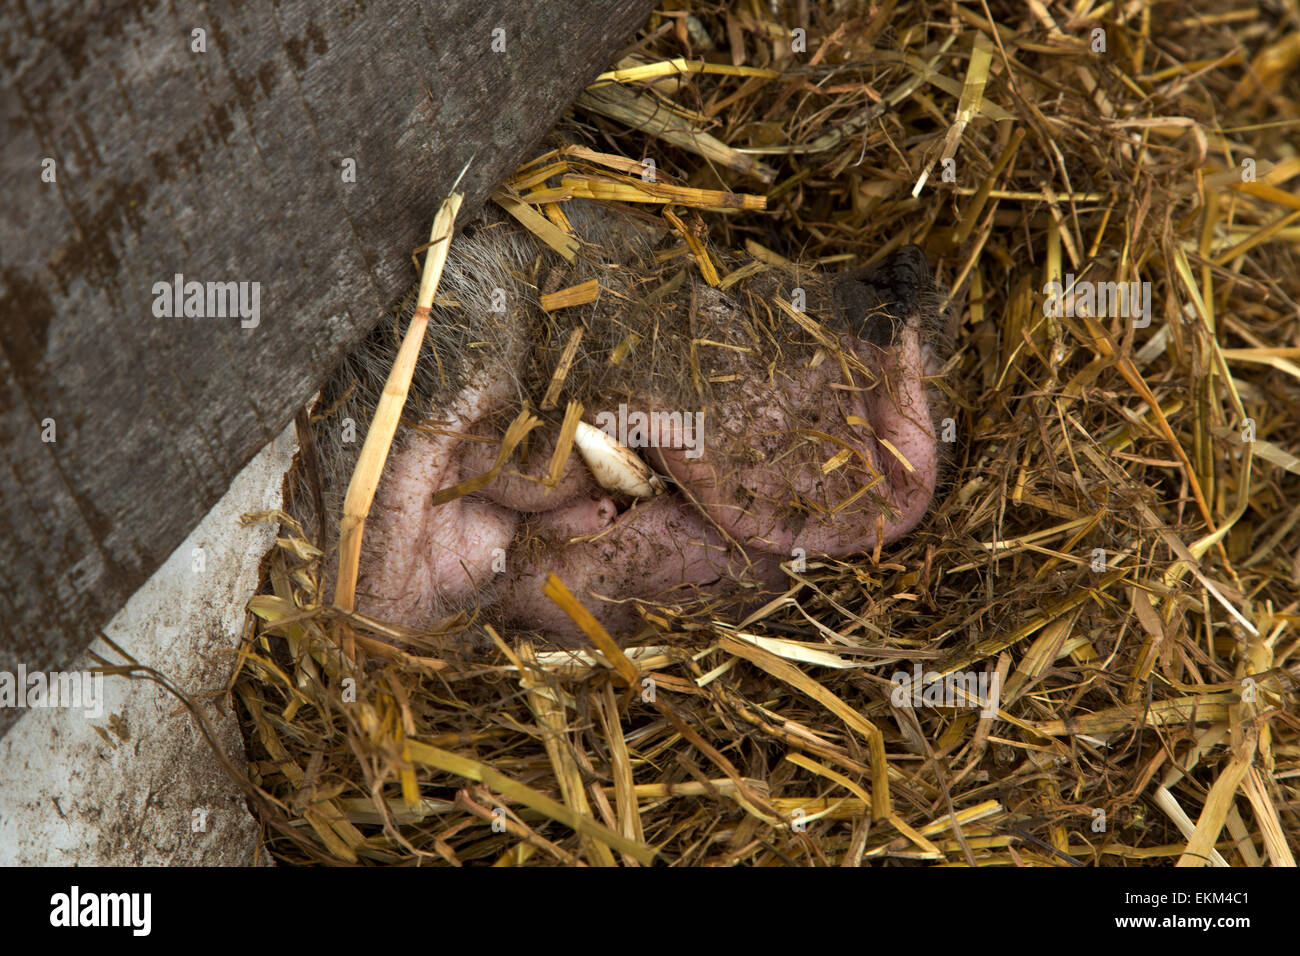 Snout of pig peeping out of stable Stock Photo